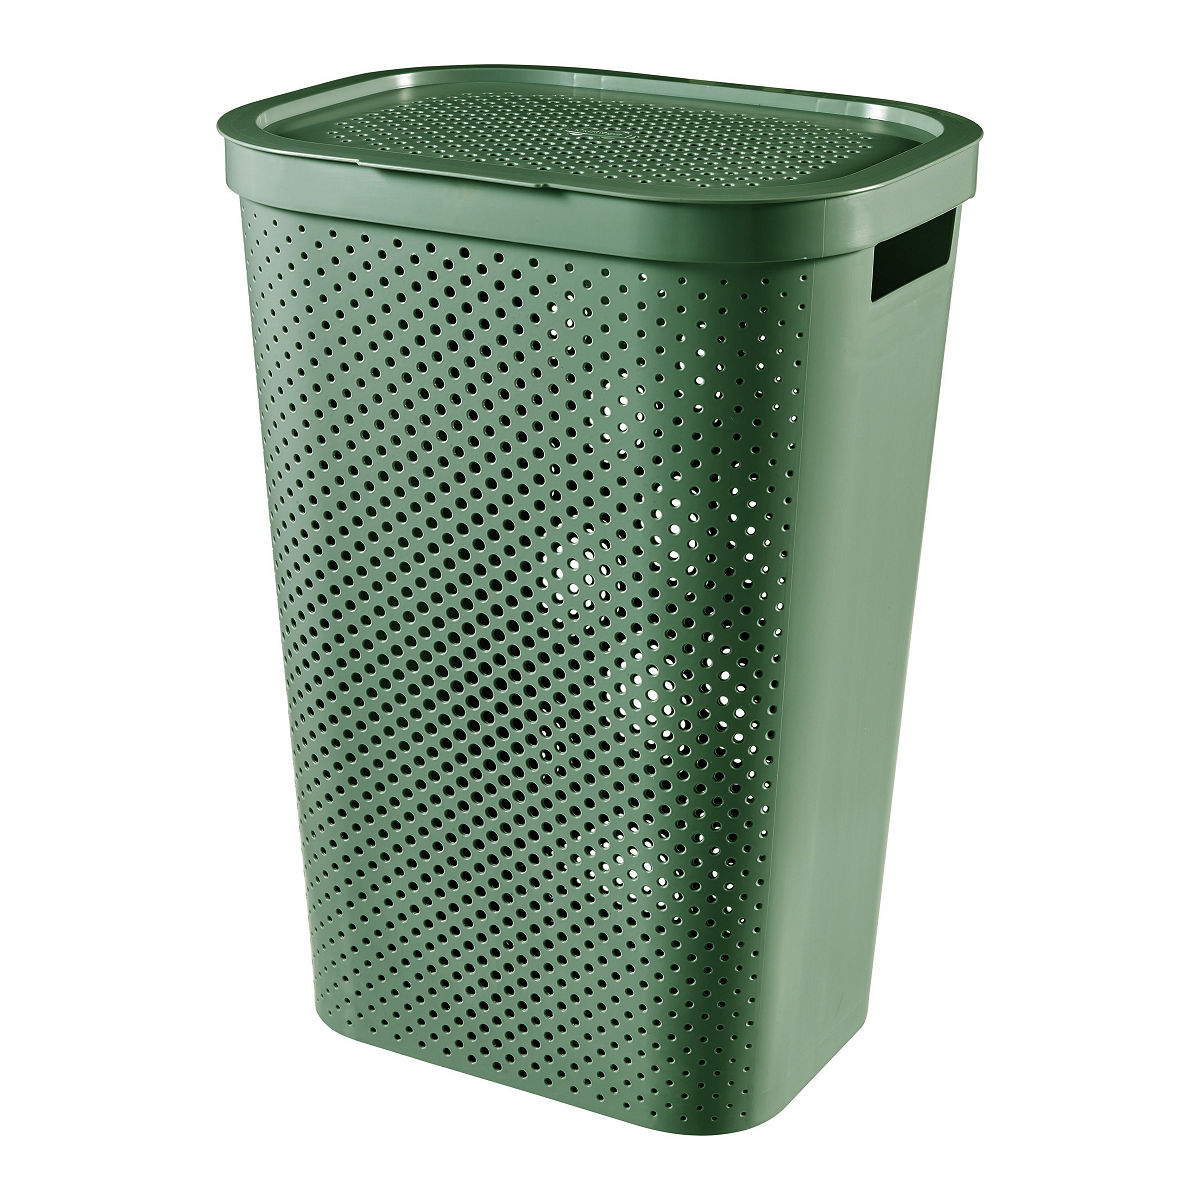 CURVER WASBOX 60 L GROEN DOTS RECYCLED - 3253924754185